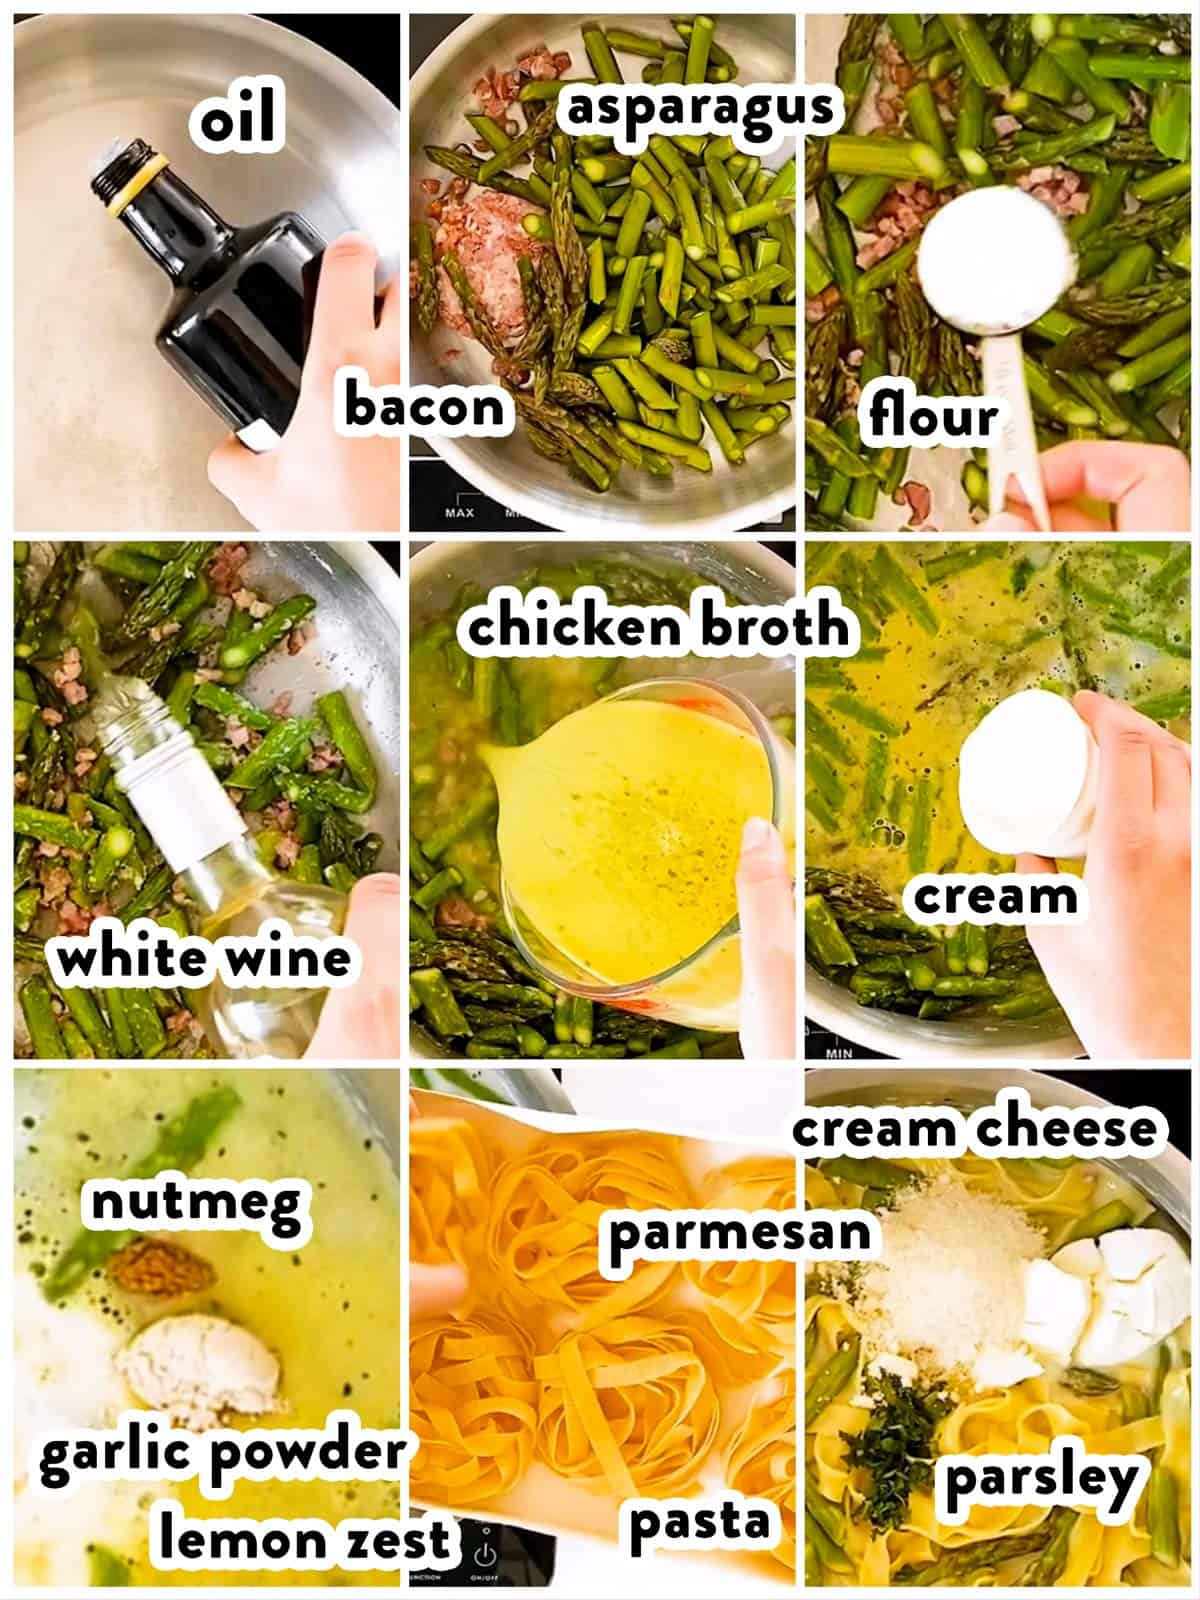 ingredients for asparagus pasta with text labels